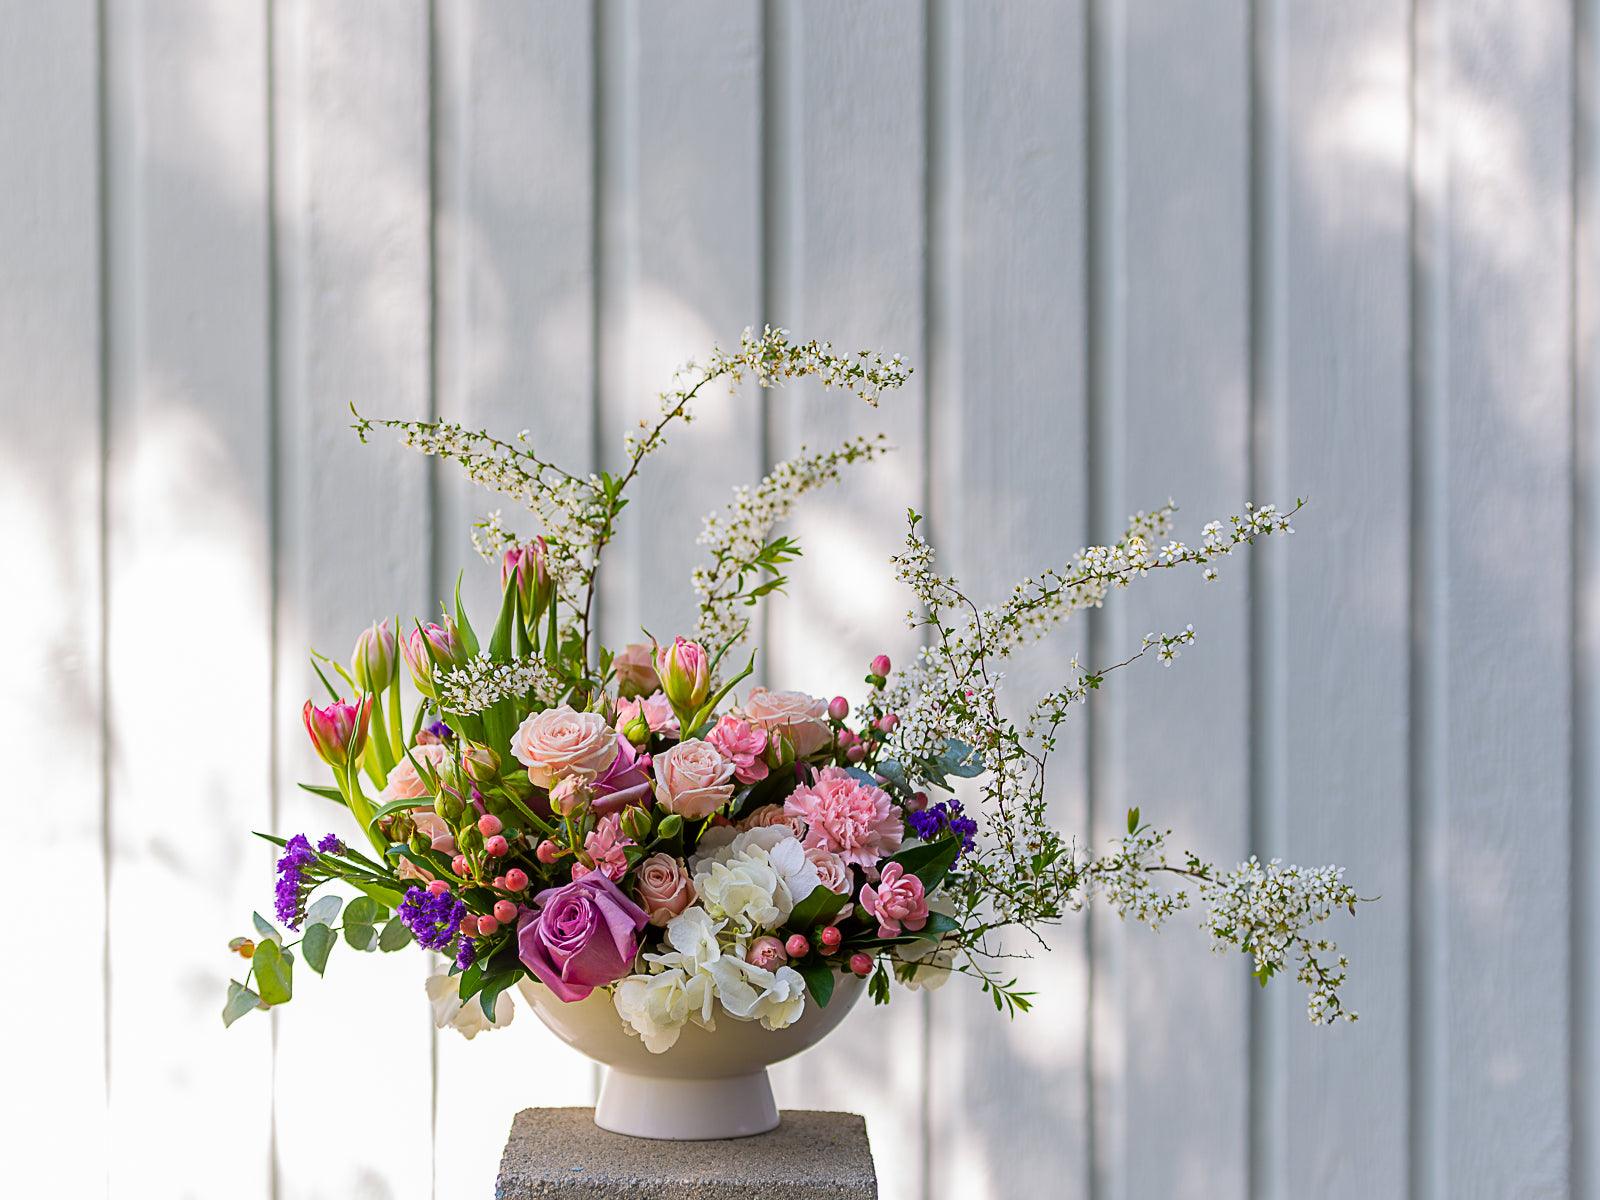 Inspired by You - Four Seasons Floristry